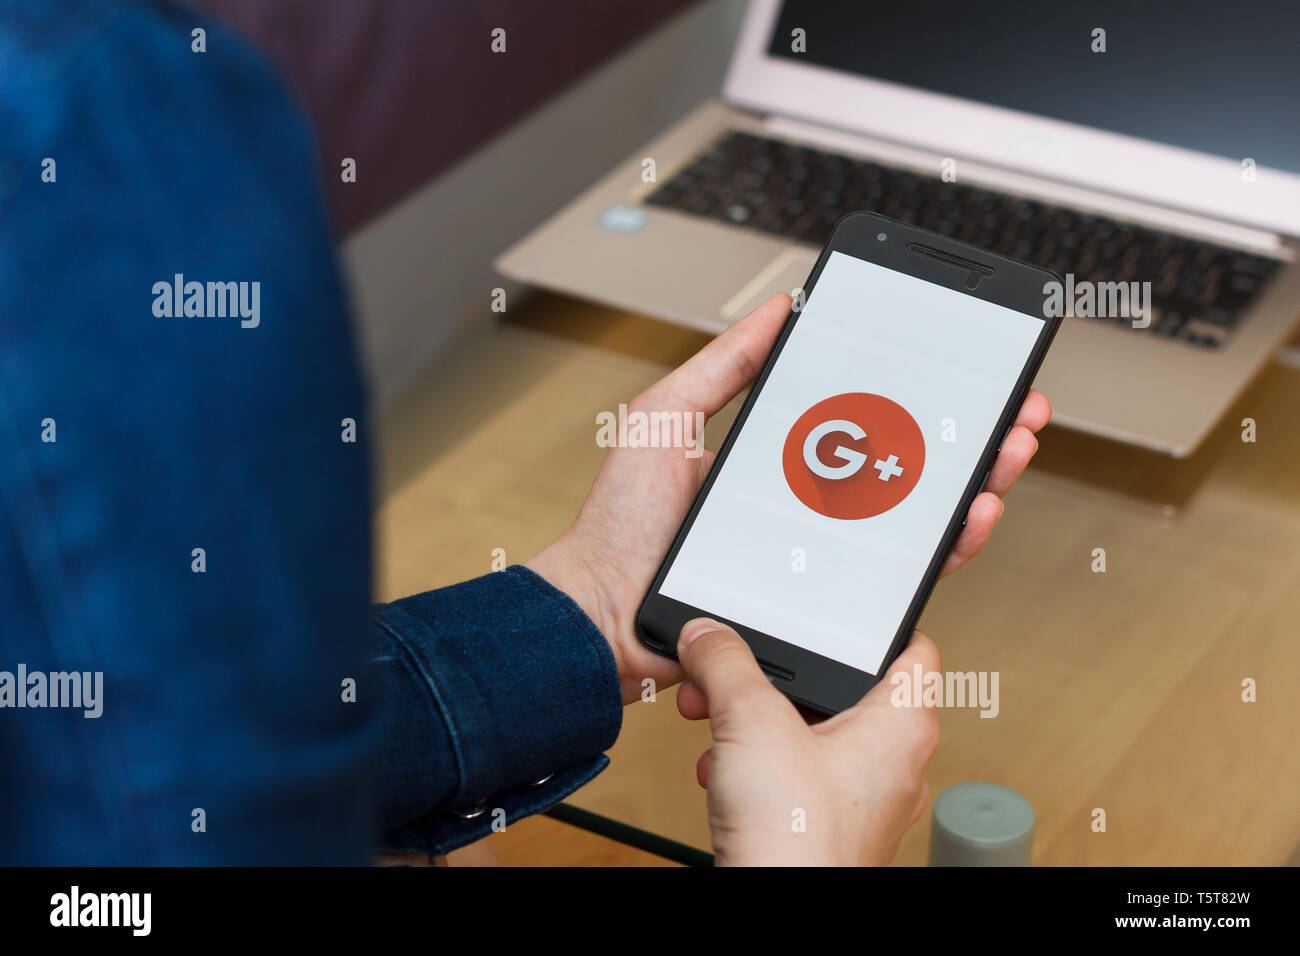 SAN FRANCISCO, US - 22 April 2019: Close up to female hands holding smartphone using Google plus for G Suite application, San Francisco, California, U Stock Photo